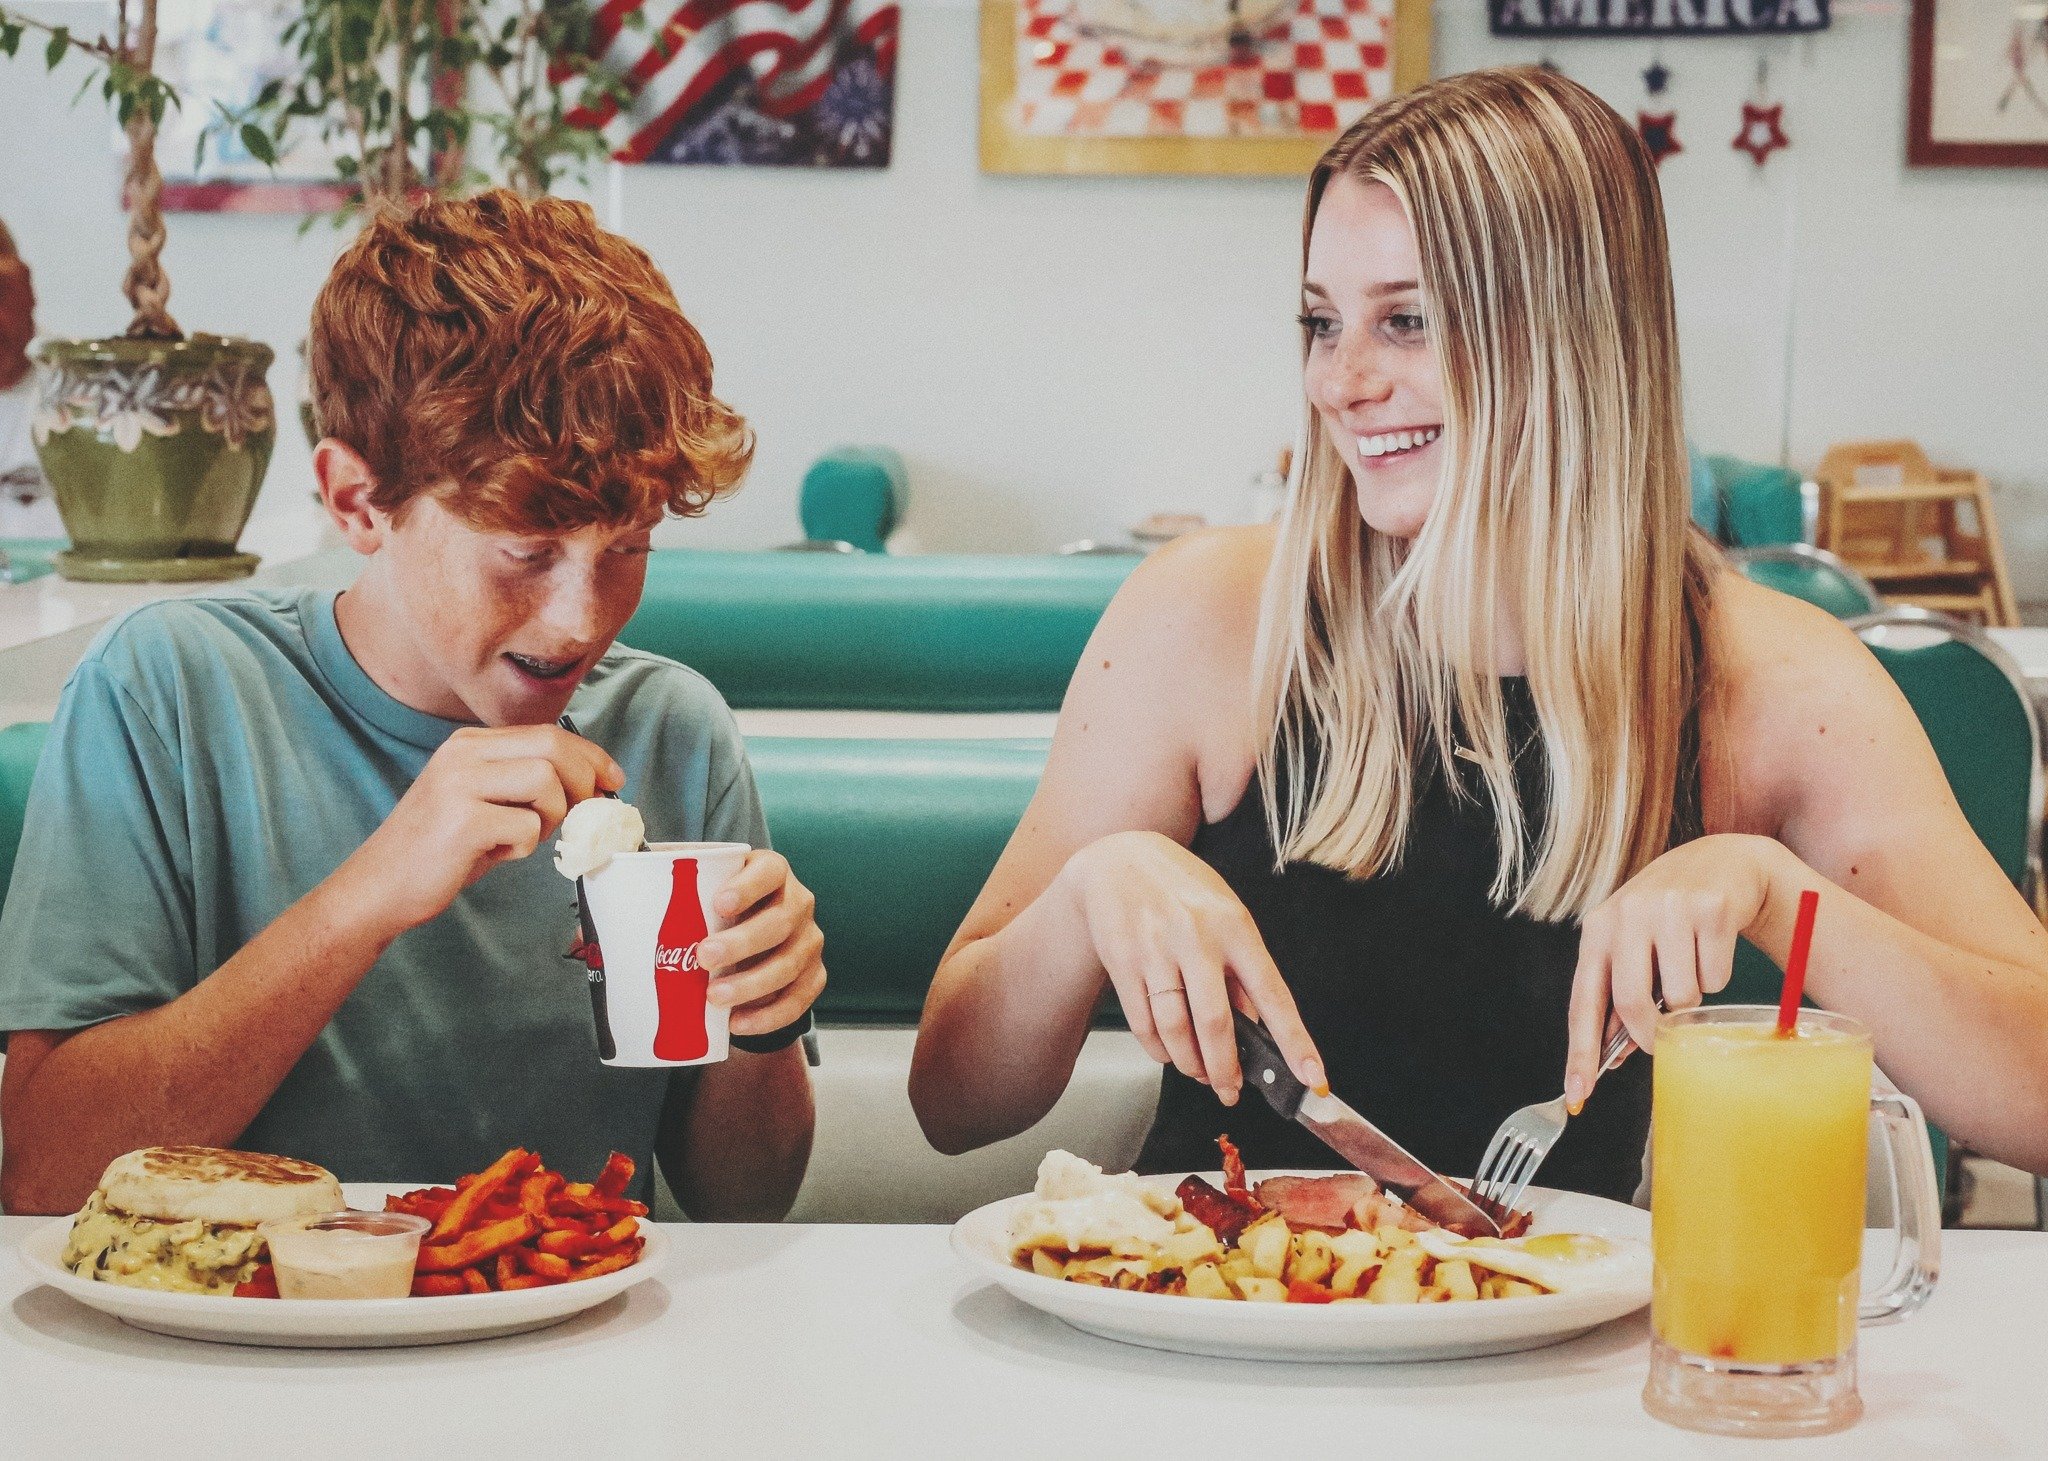 Richie&rsquo;s Diner Rancho Cucamonga&rsquo;s Sunday Family Dinner Tradition is more than Good Country Cookin&rsquo;, its conversation, reconnection, and memories.  It&rsquo;s family.

@richiesrealamericandiner